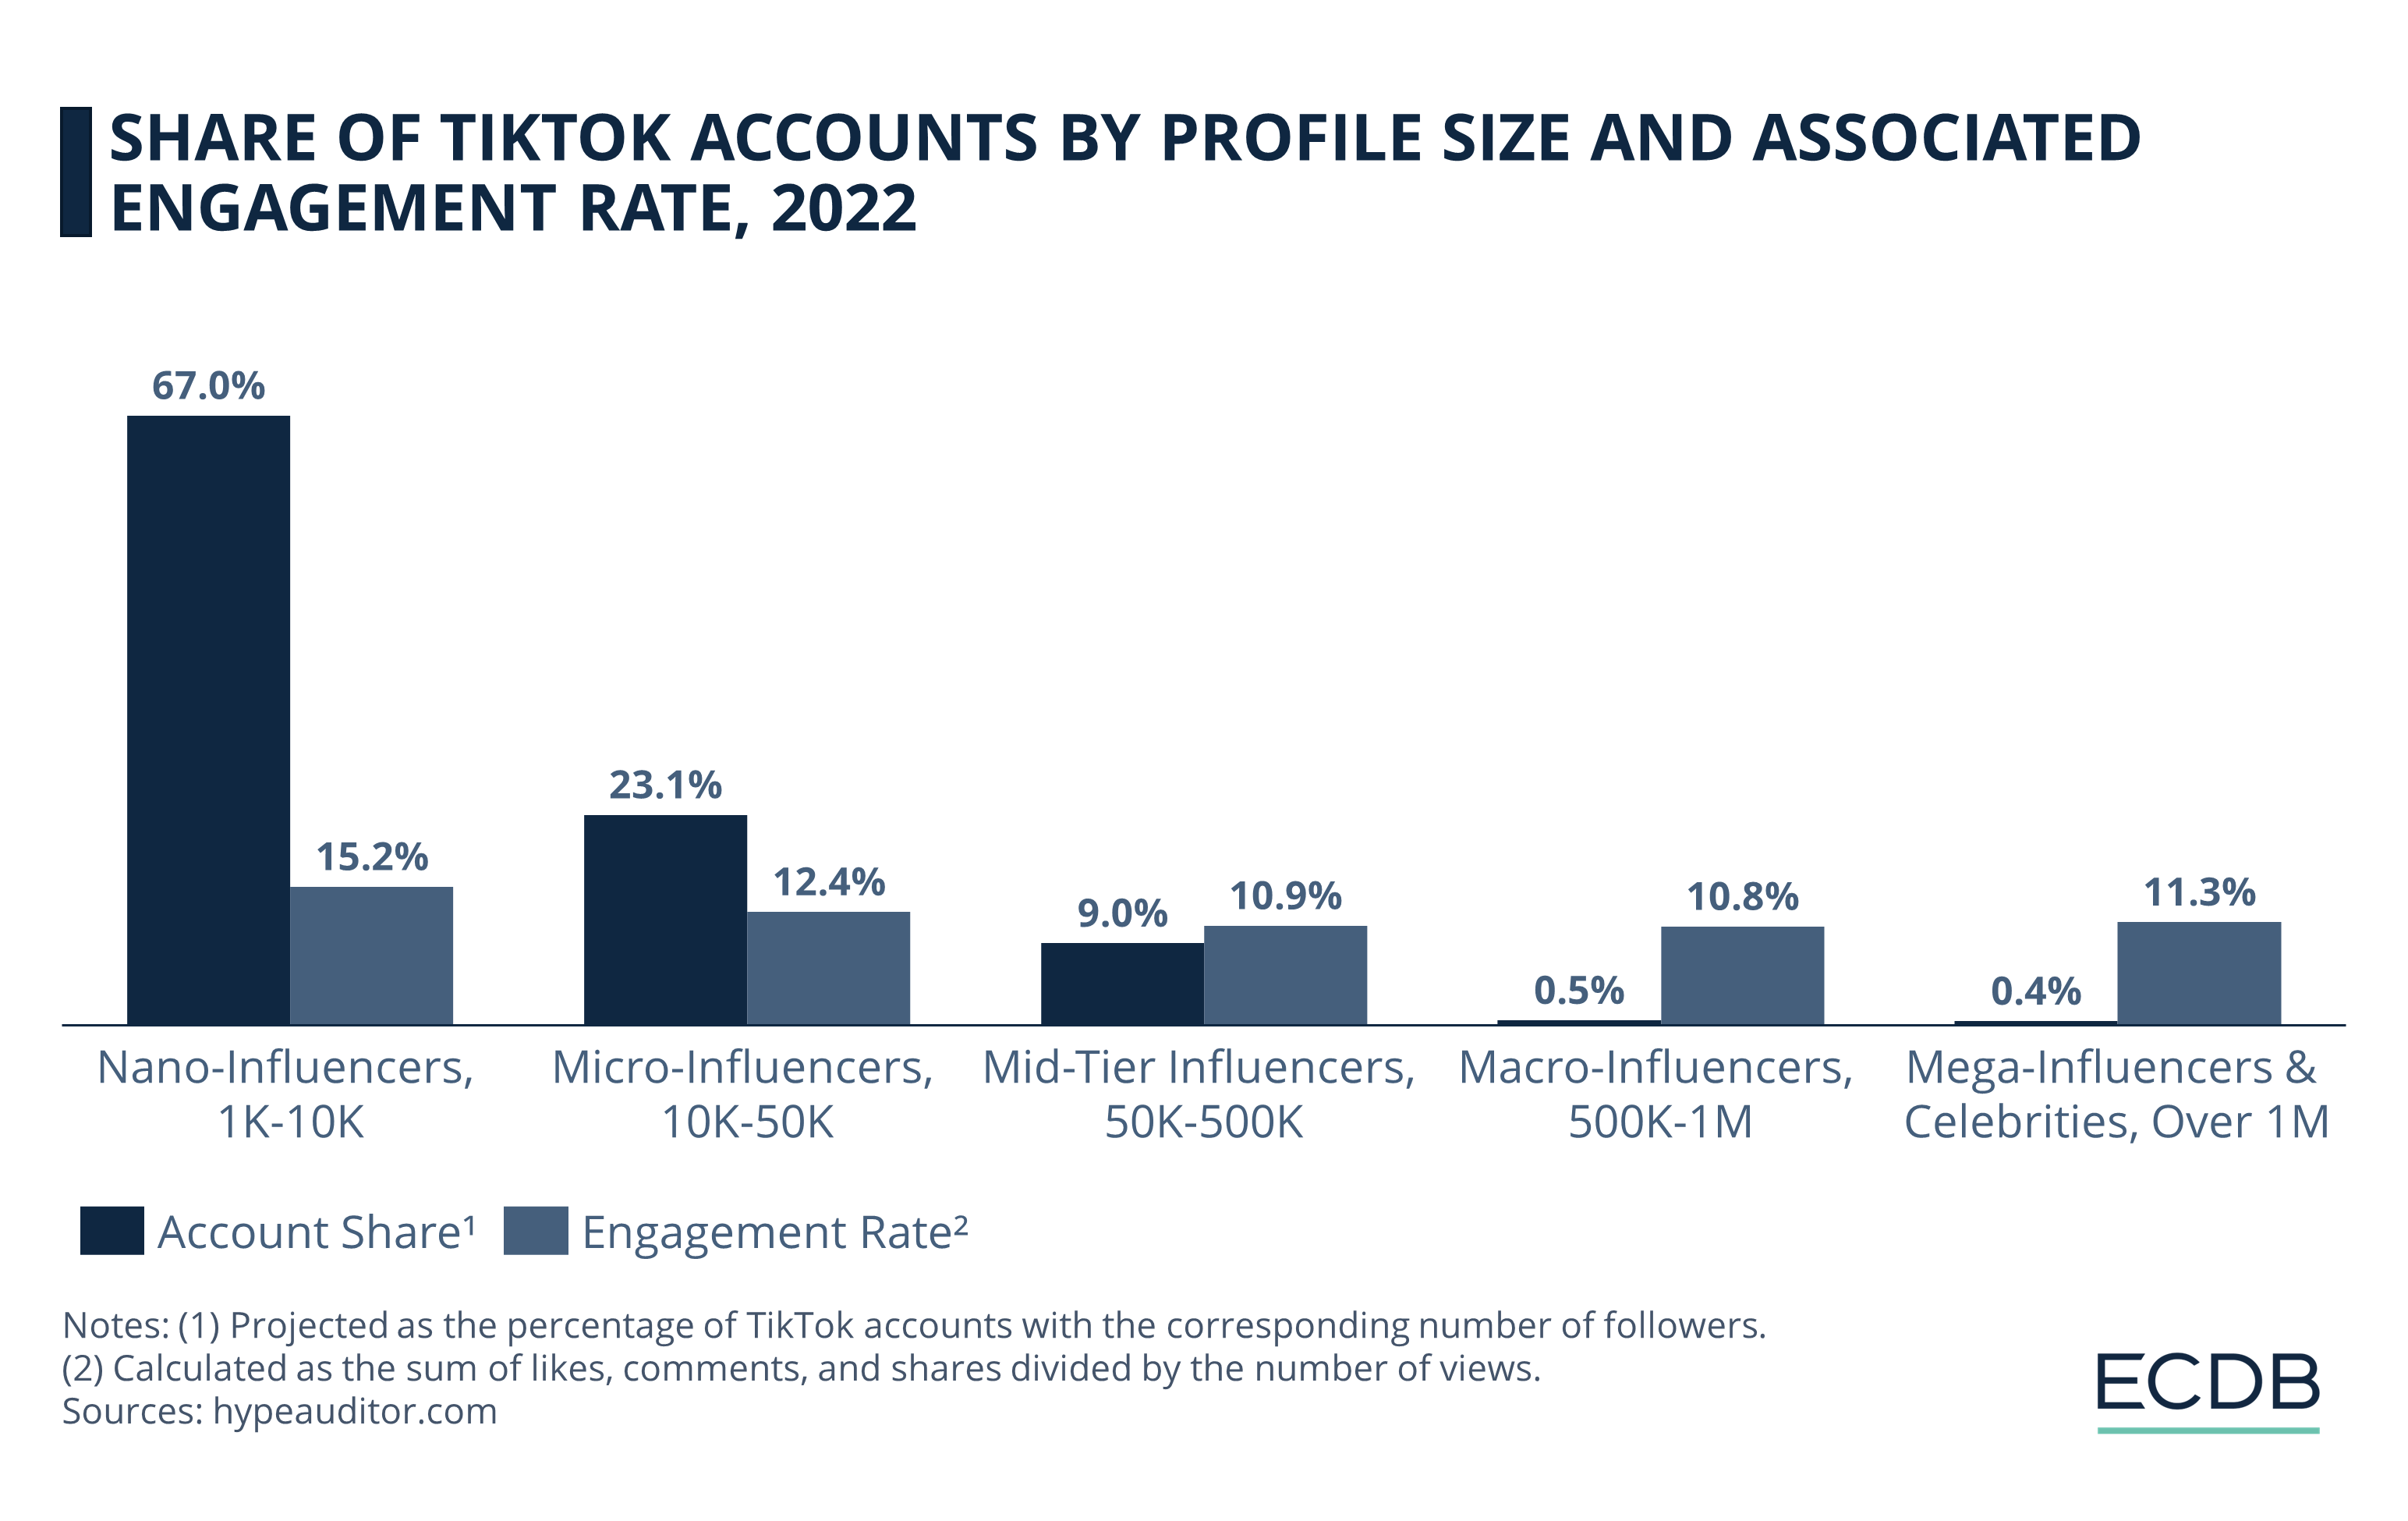 Share of TikTok Accounts by Profile Size and Associated Engagement Rate, 2022